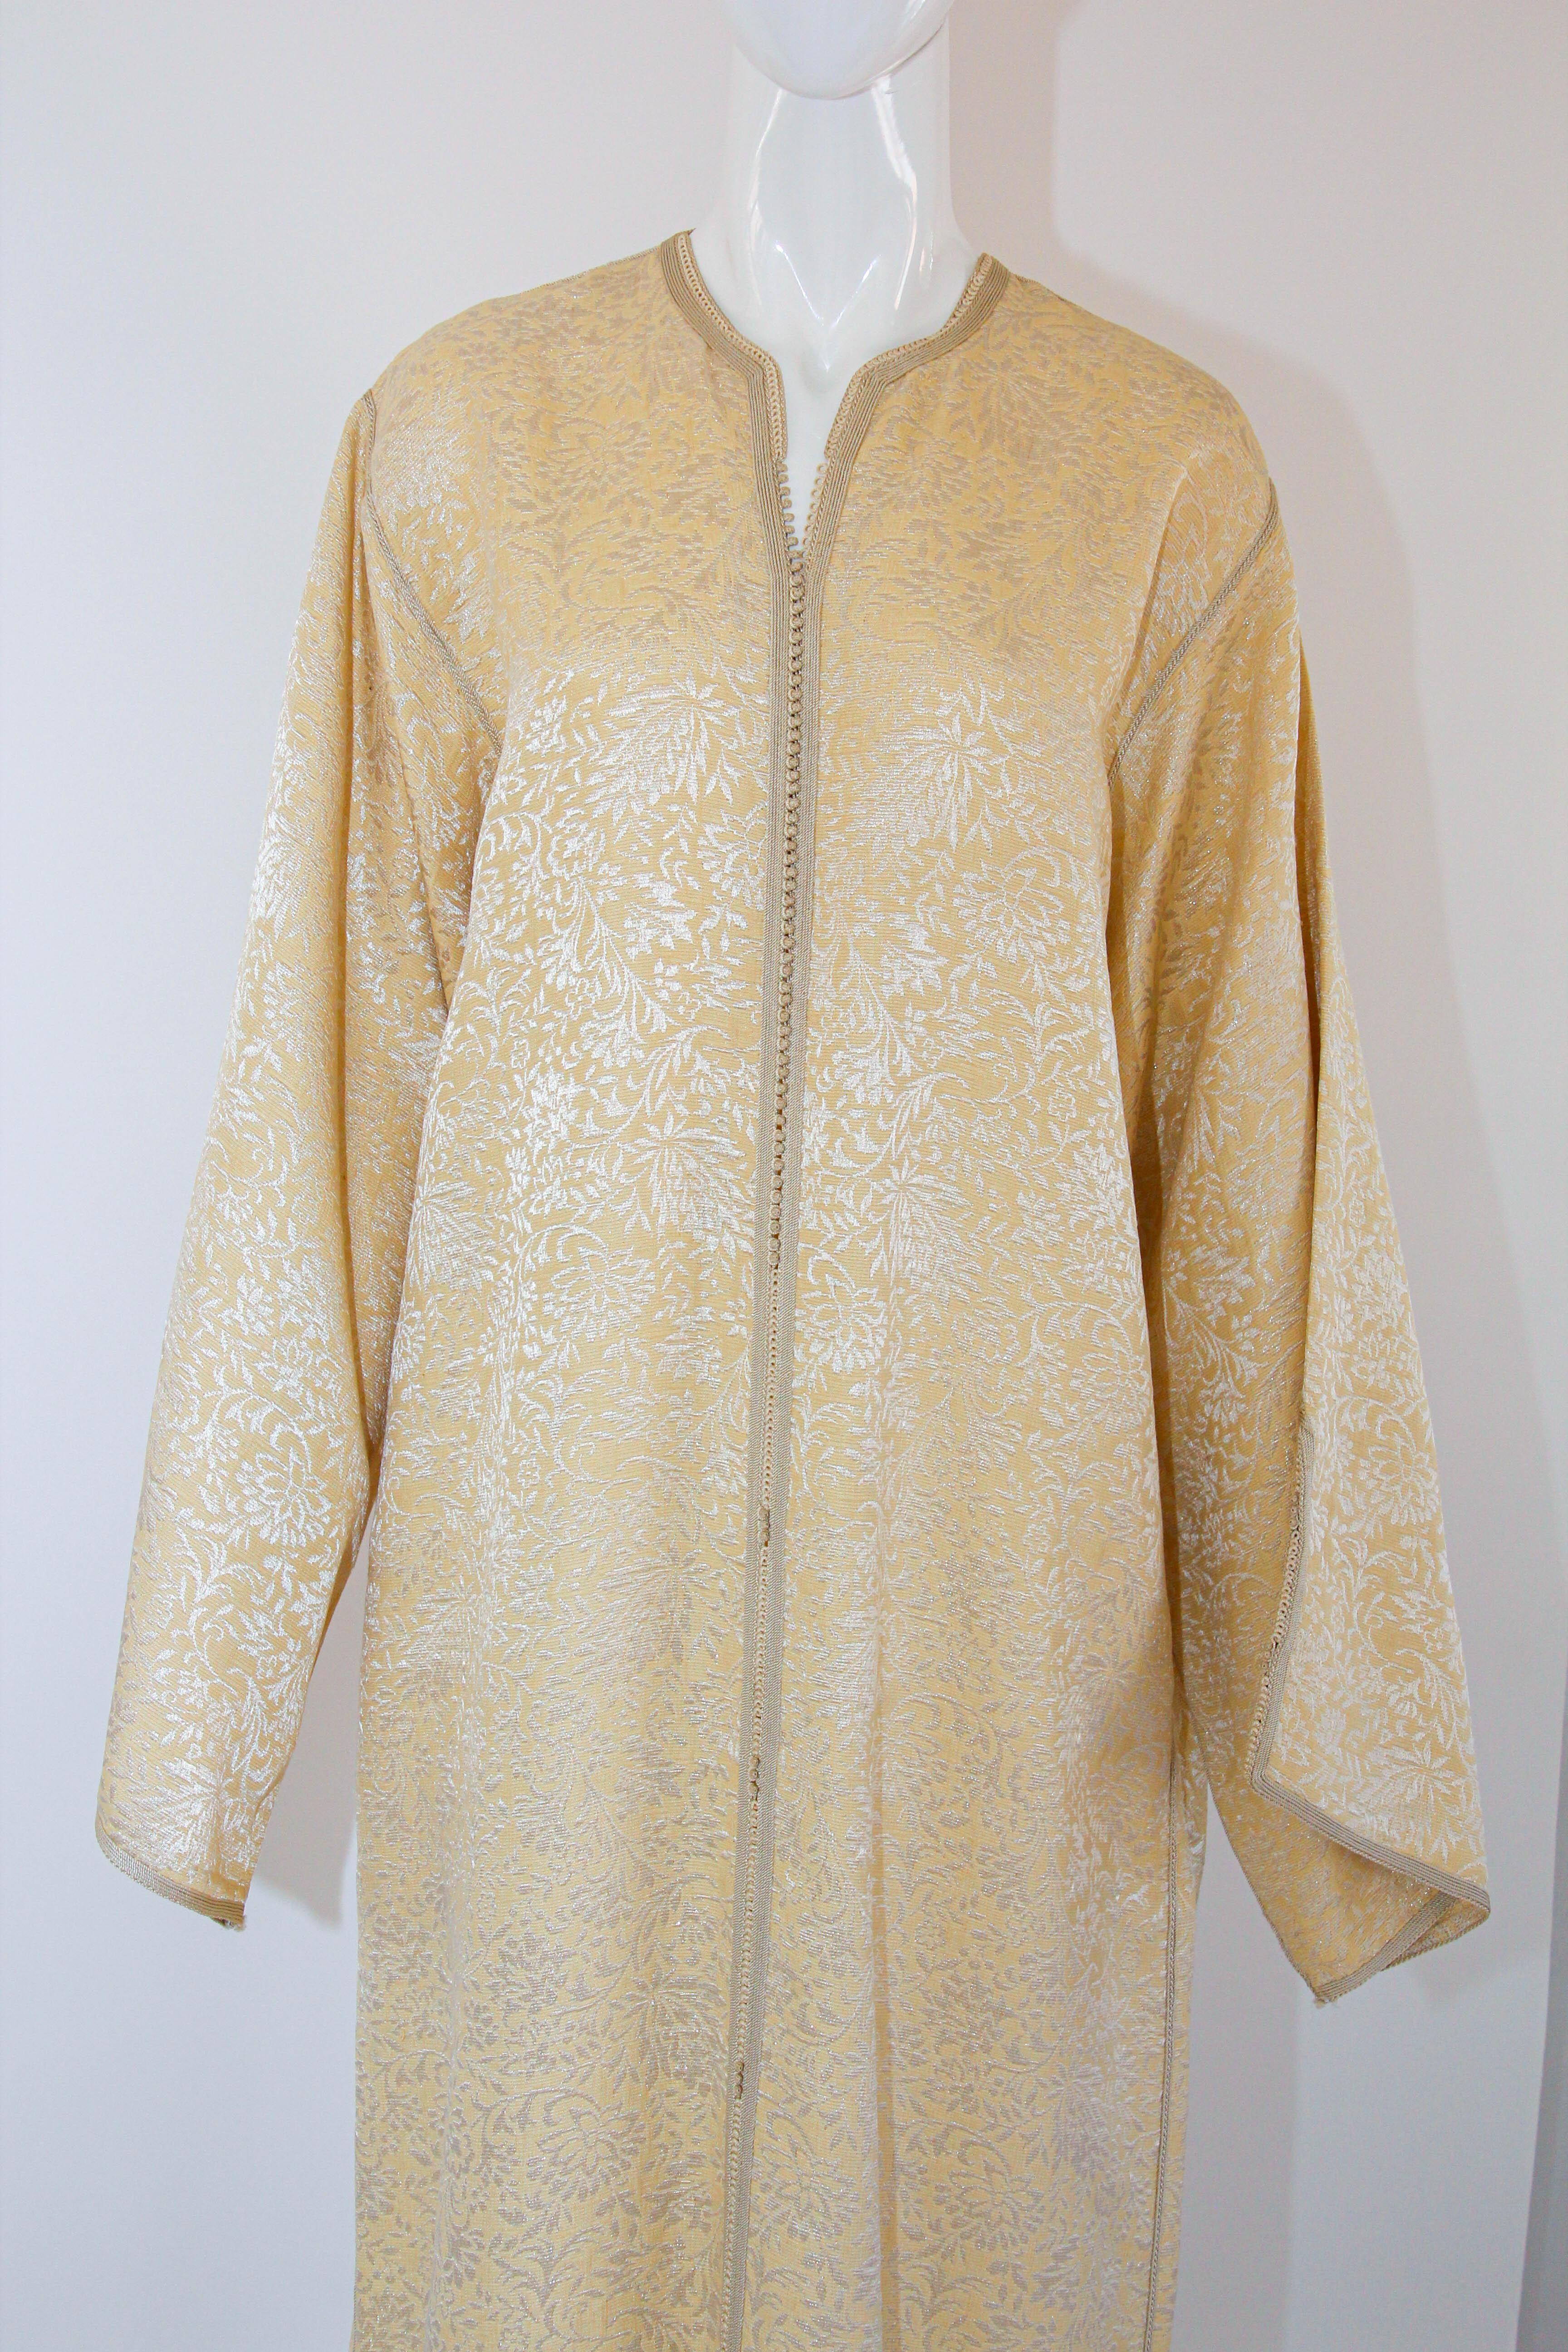 1970s Moroccan Vintage Caftan Gold Silk Cotton Damask In Good Condition For Sale In North Hollywood, CA